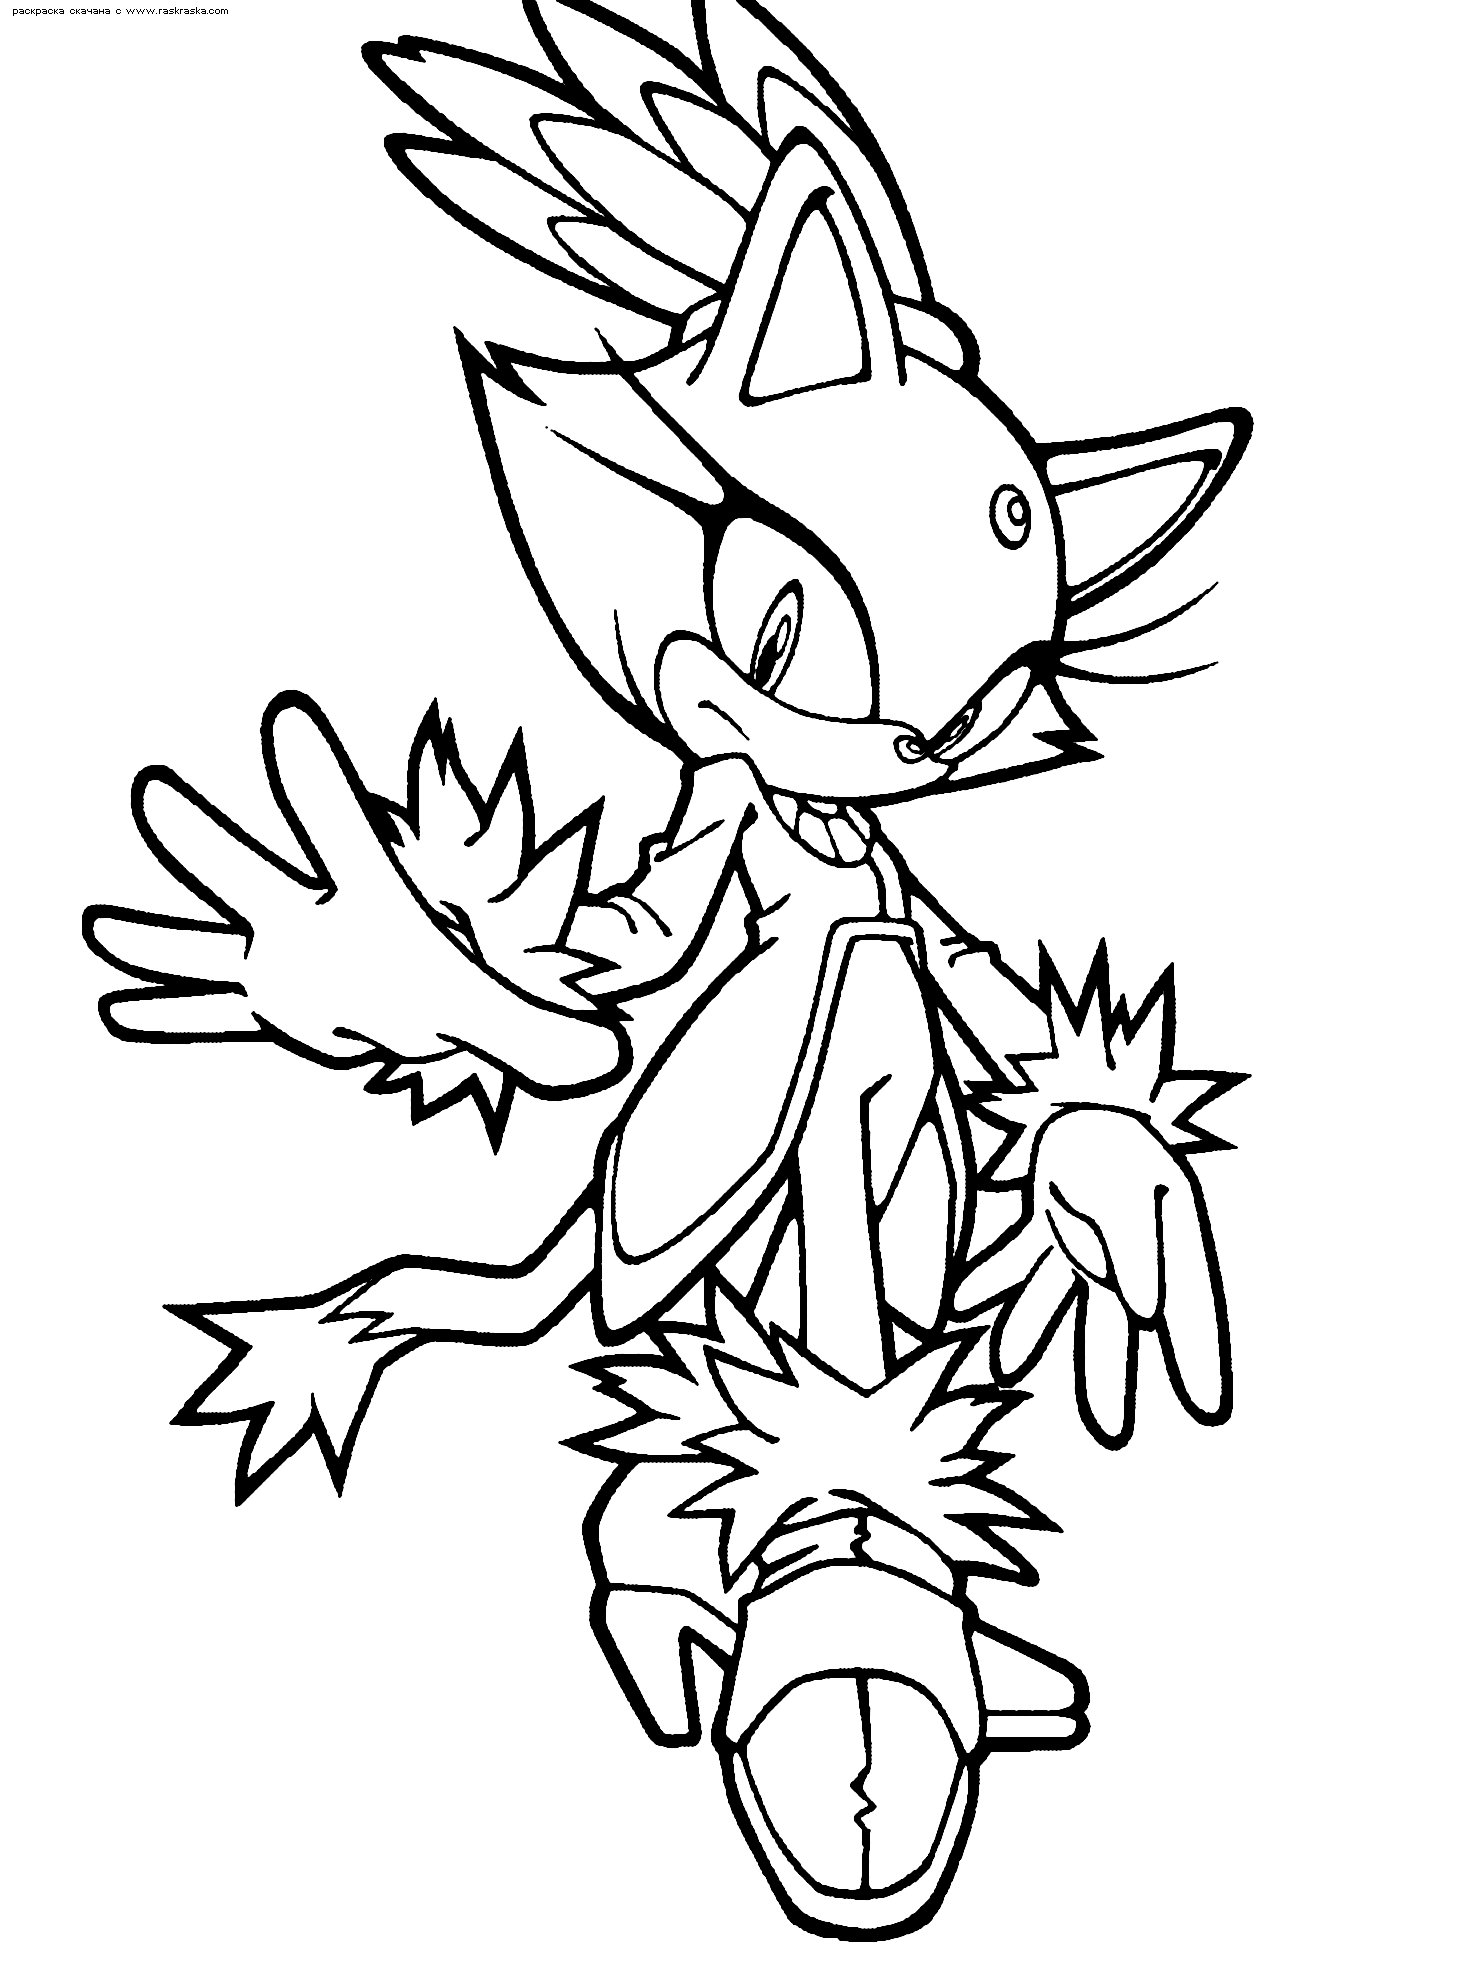 sonic coloring pages online for free free printable sonic the hedgehog coloring pages for kids sonic coloring pages online free for 